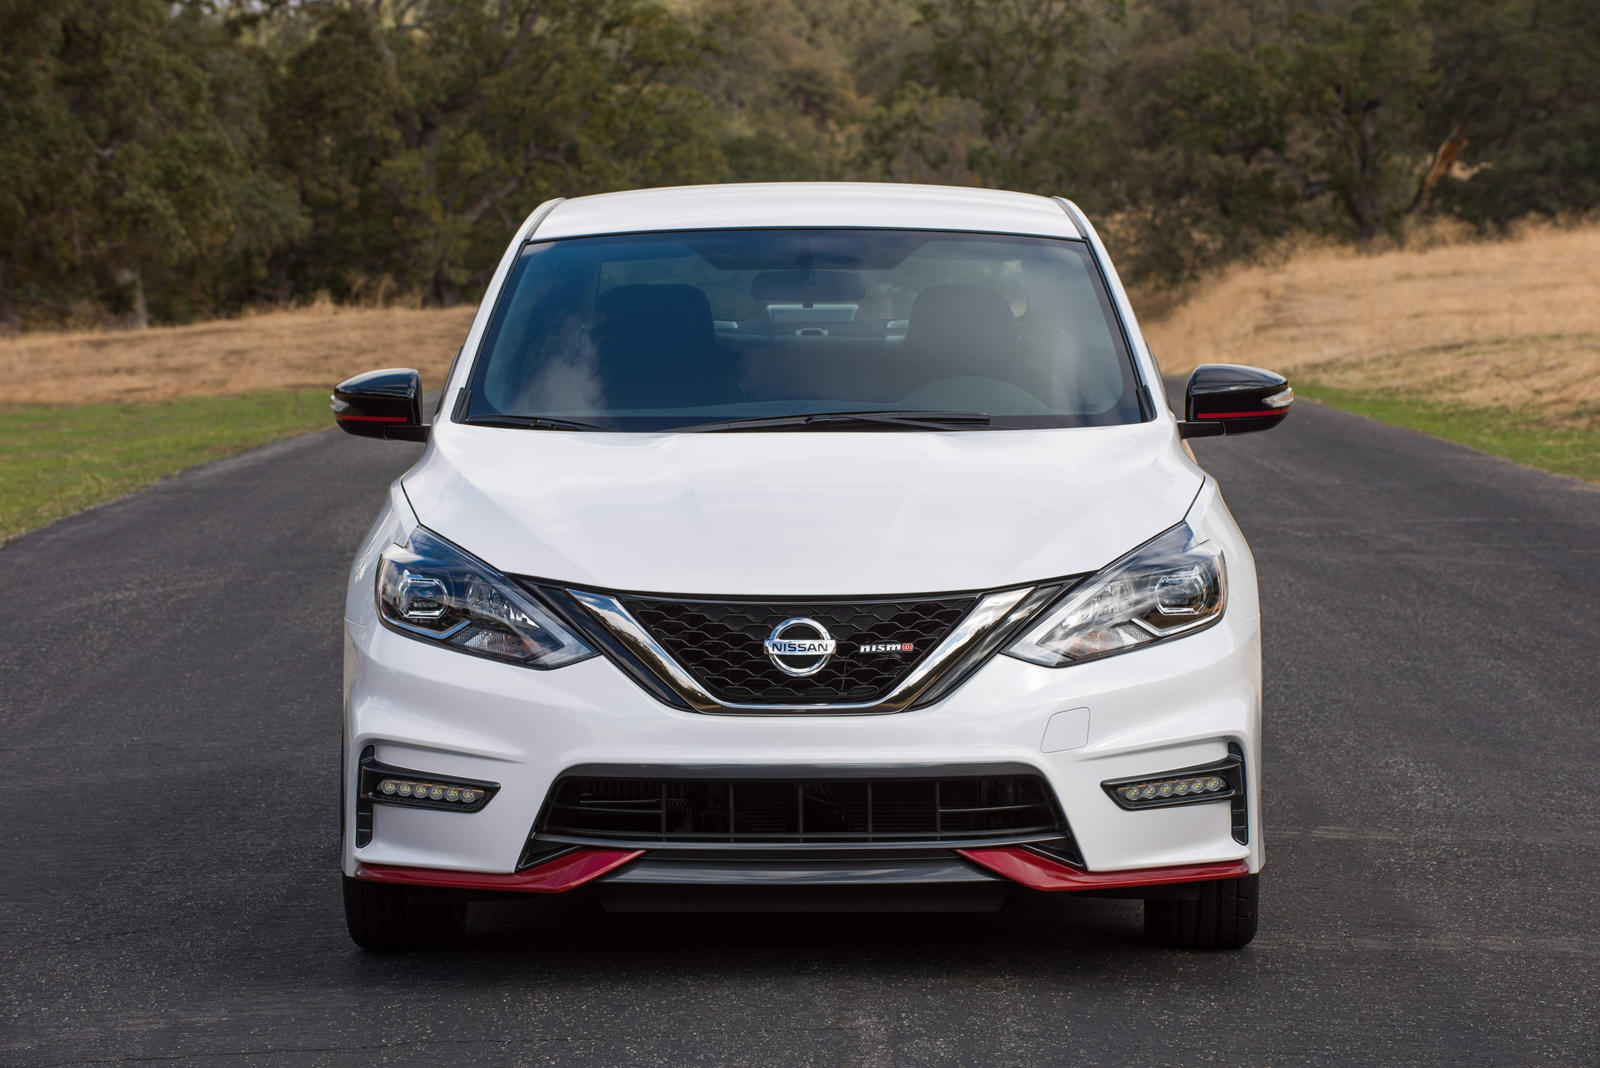 2018 Nissan Sentra NISMO Front View